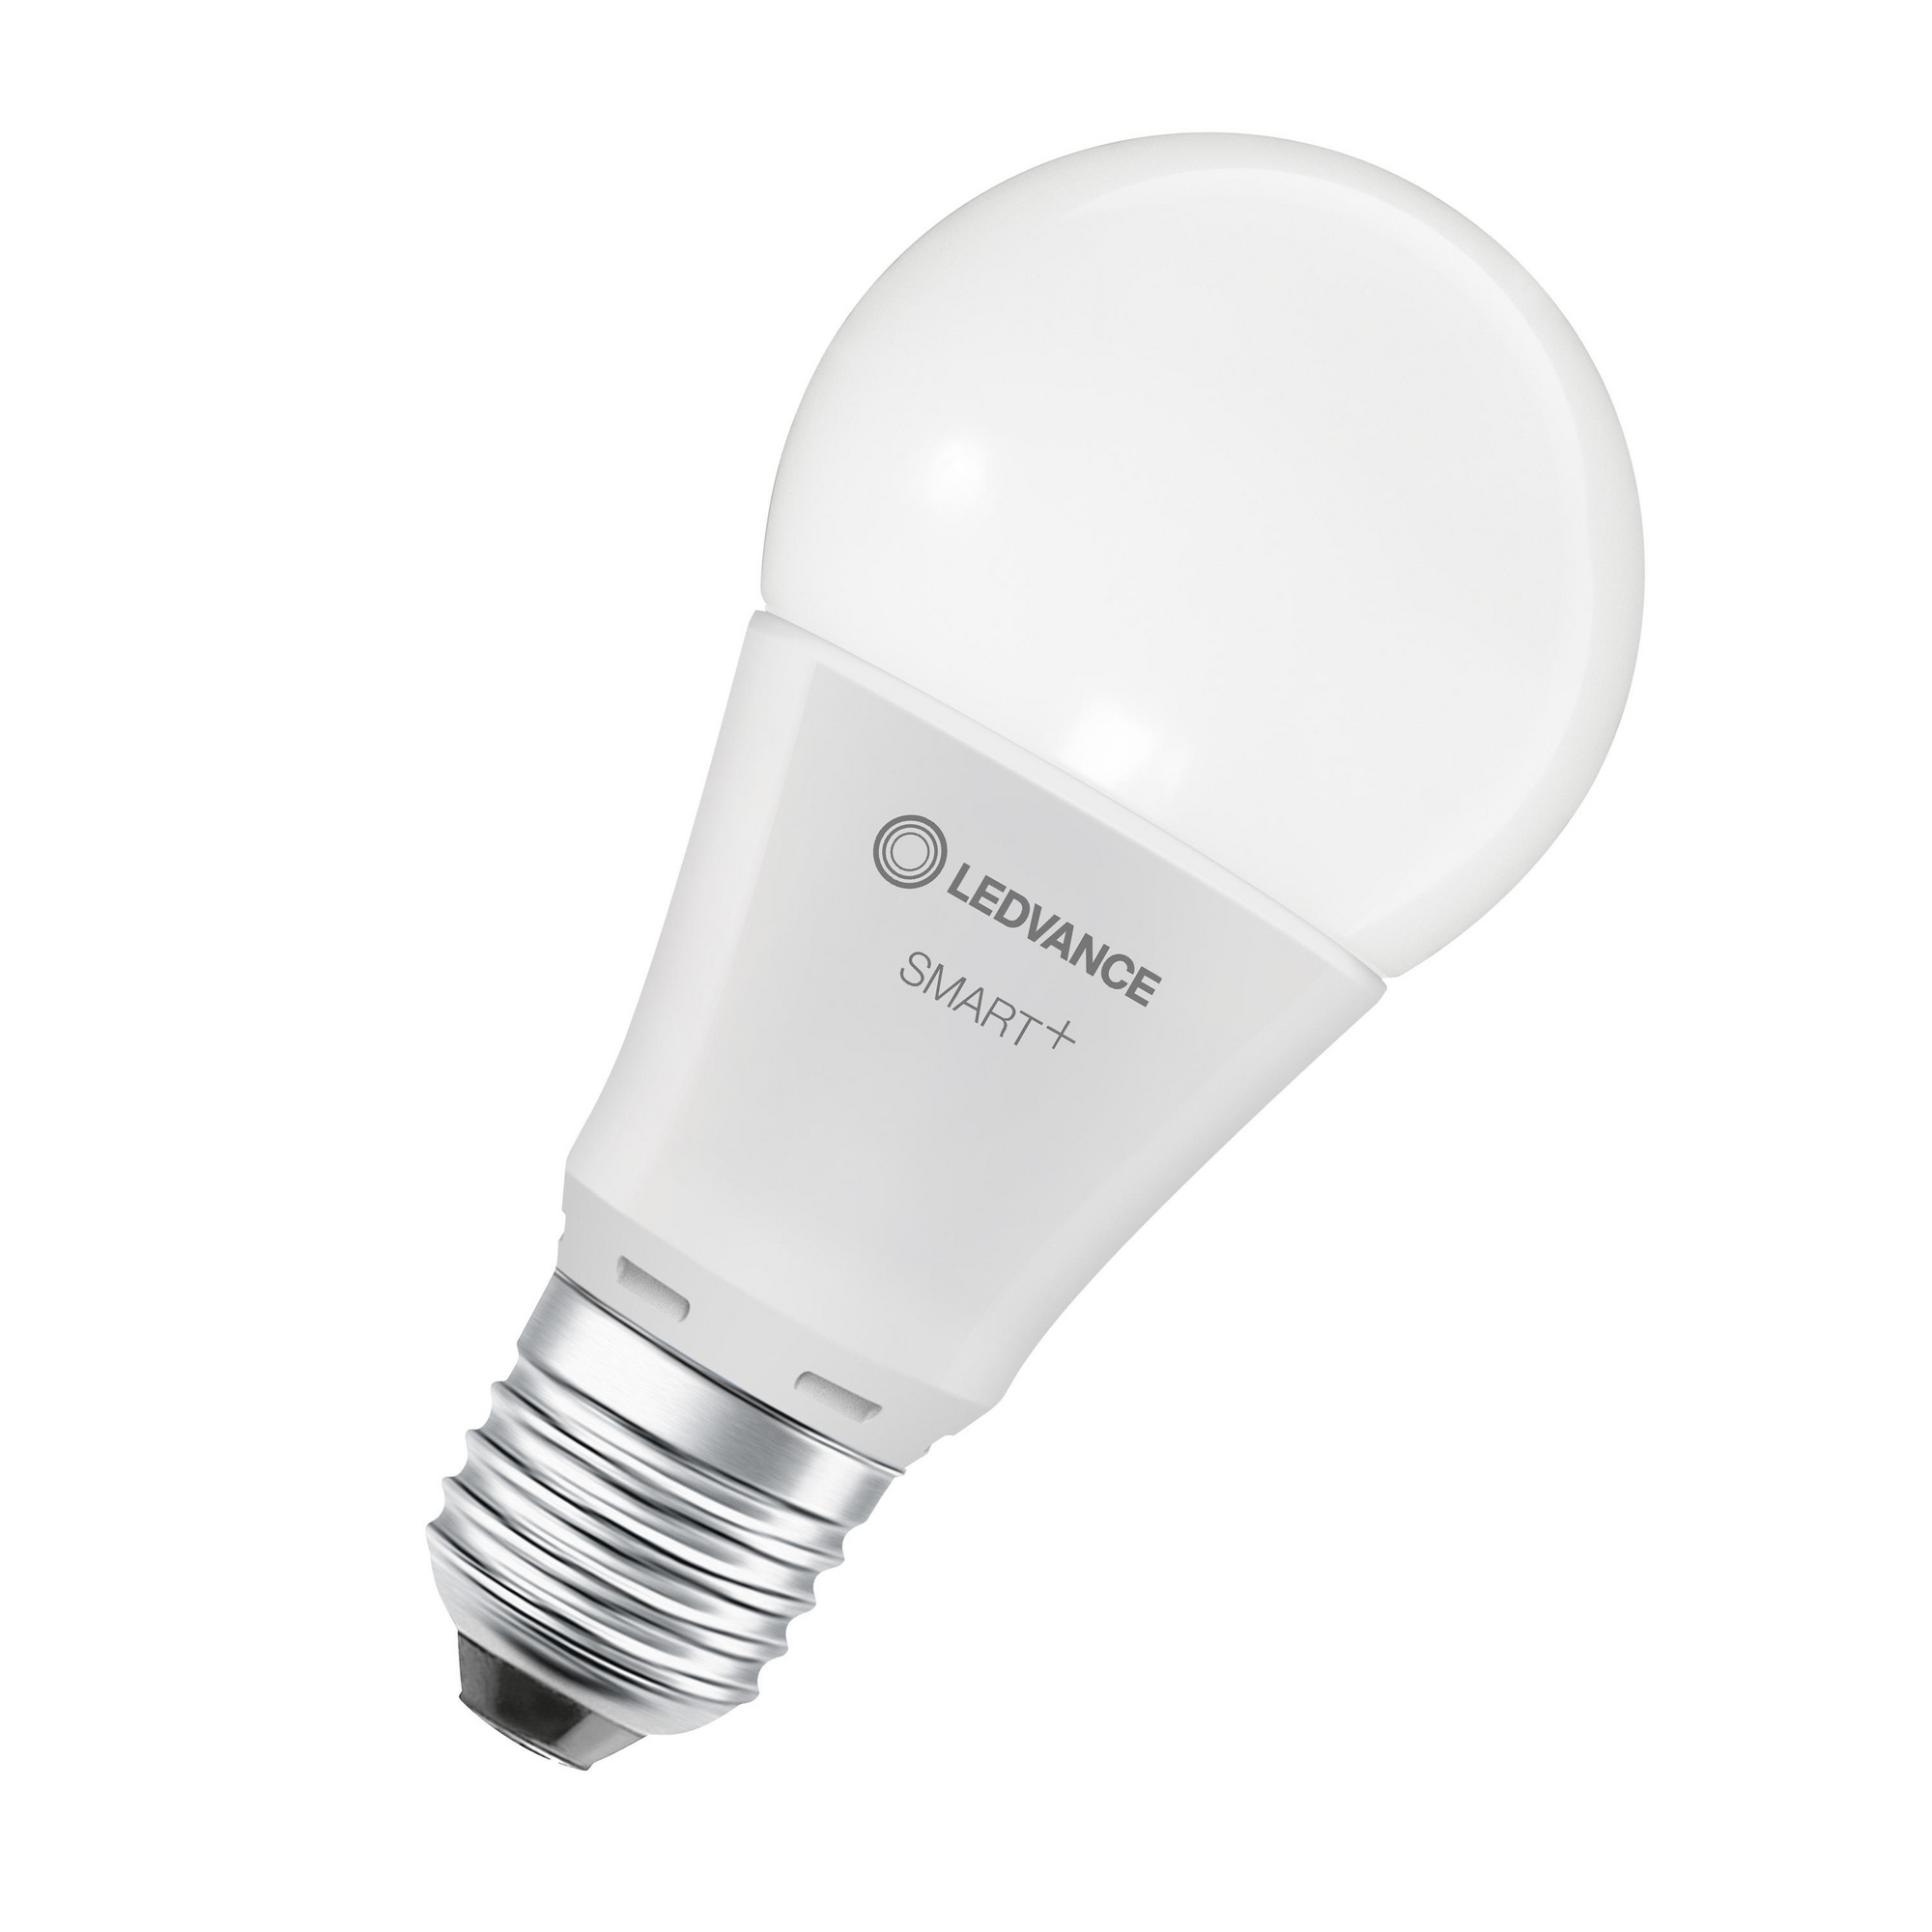 LED-Lampe 'Smart+' 11,5 cm 806 lm 9 W E27 weiß WLAN dimmbar + product picture